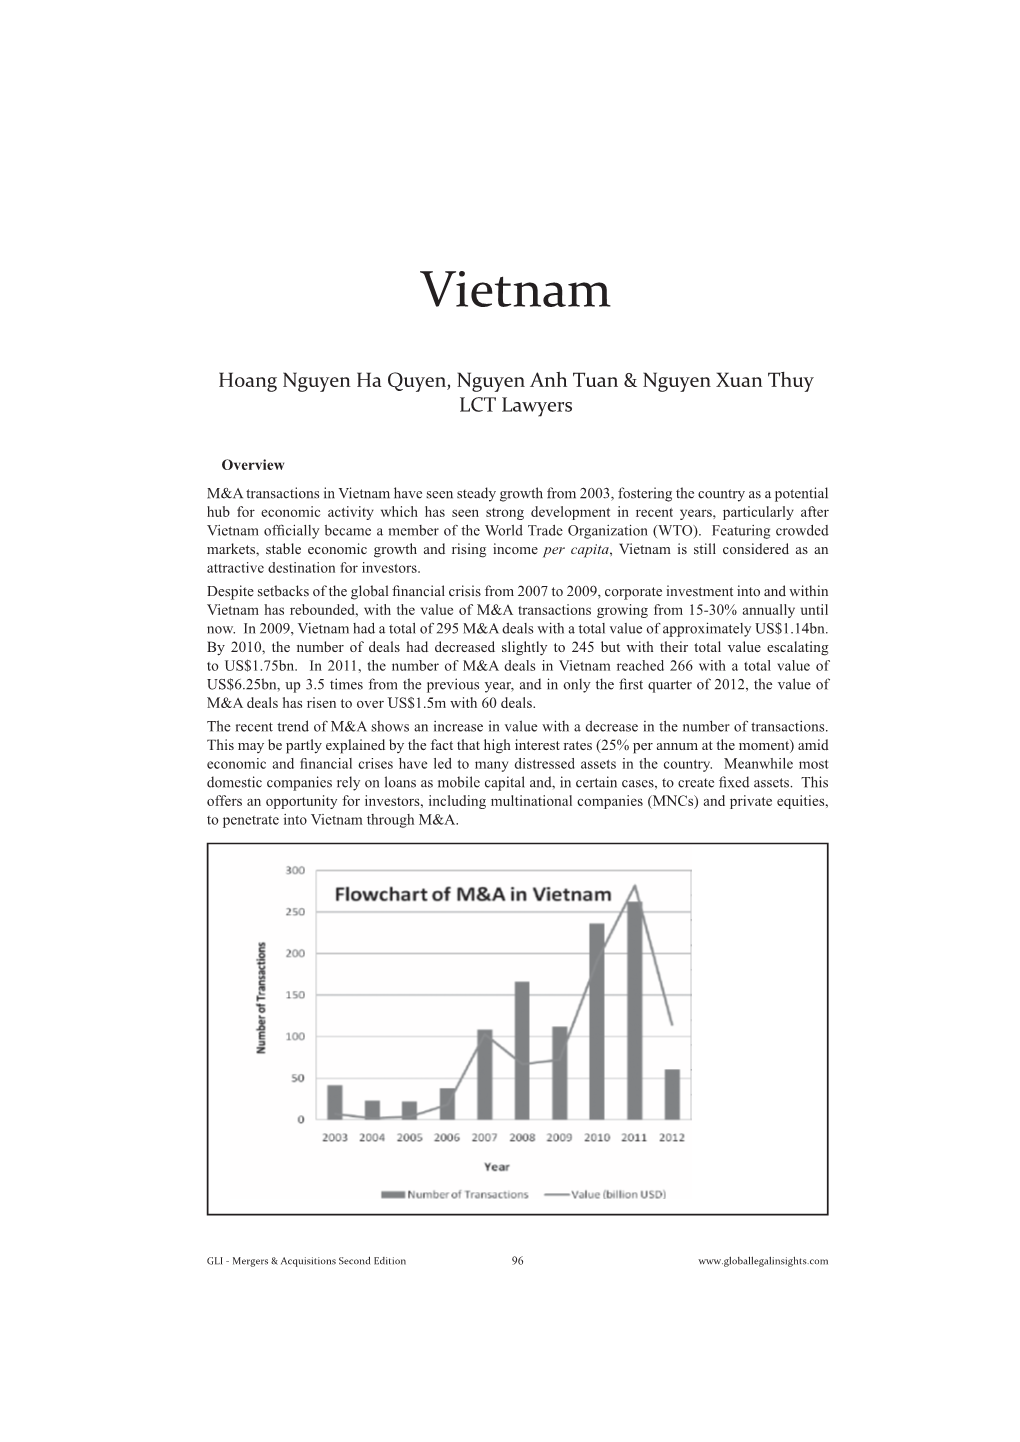 Chapter M&A in Vietnam